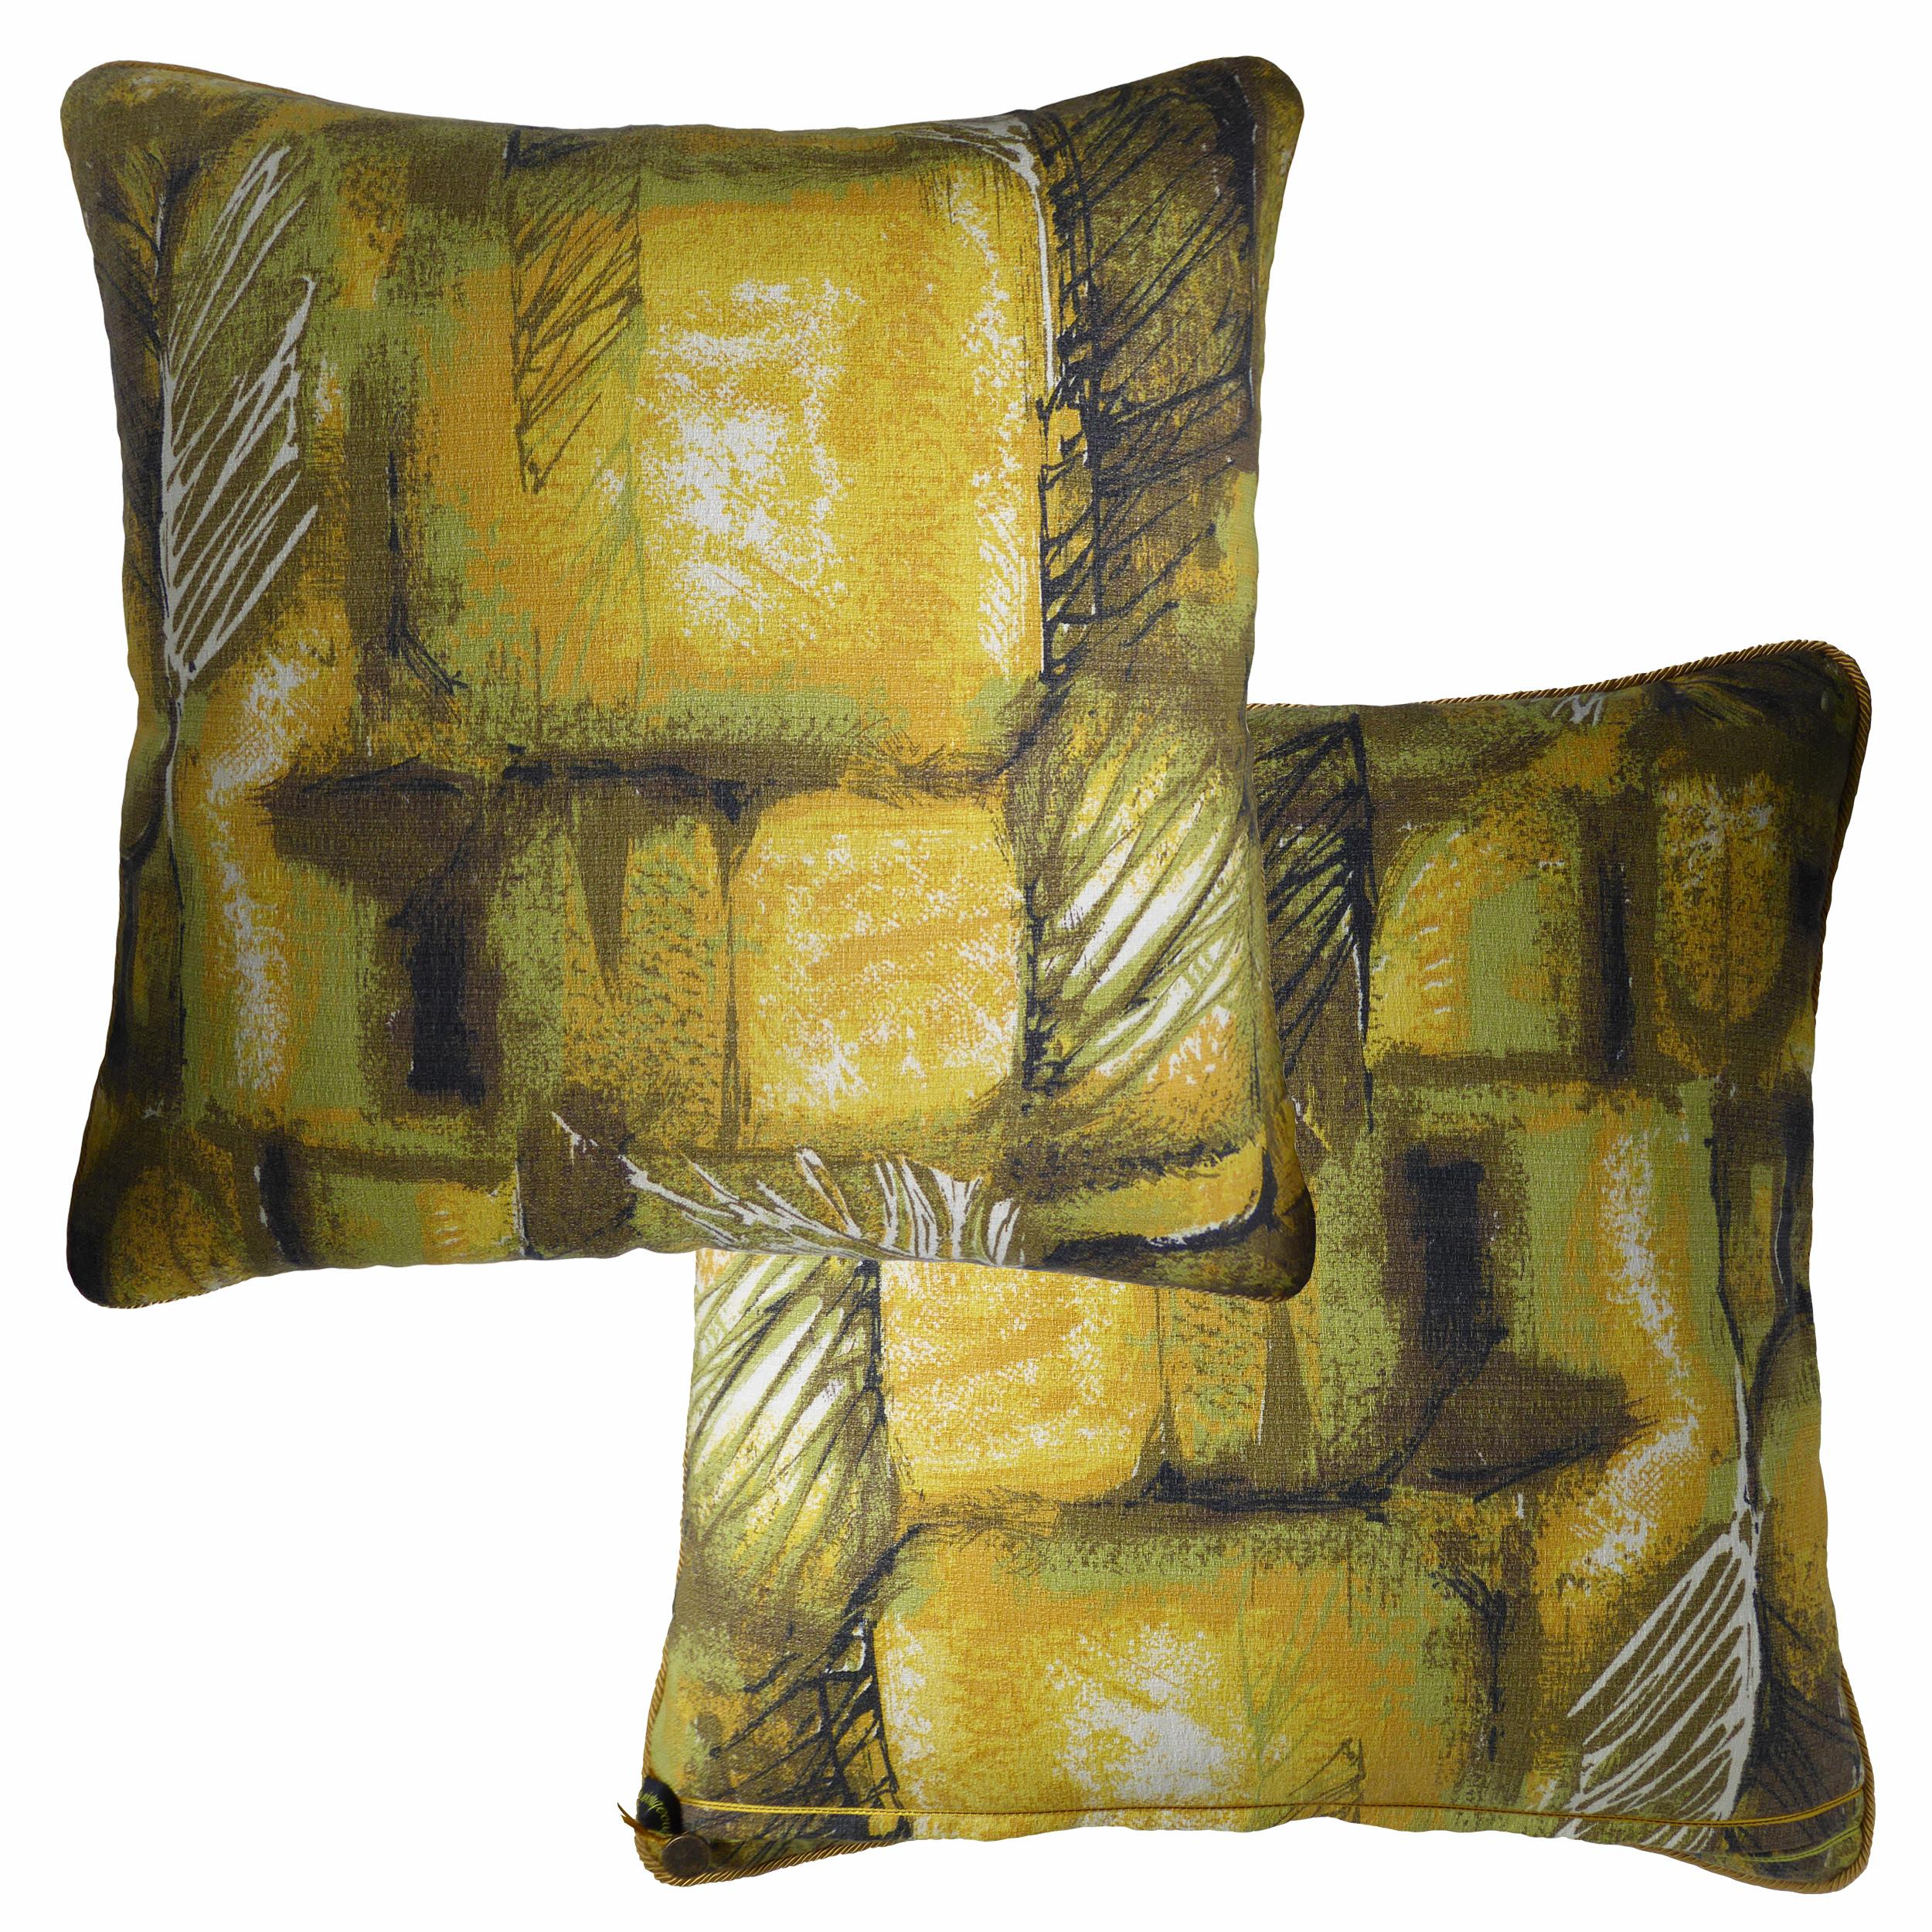 Mid-Century Modern Vintage Cushions, Bespoke-Made Luxury Pillow, 'Feather Leaf Vein', Made in UK